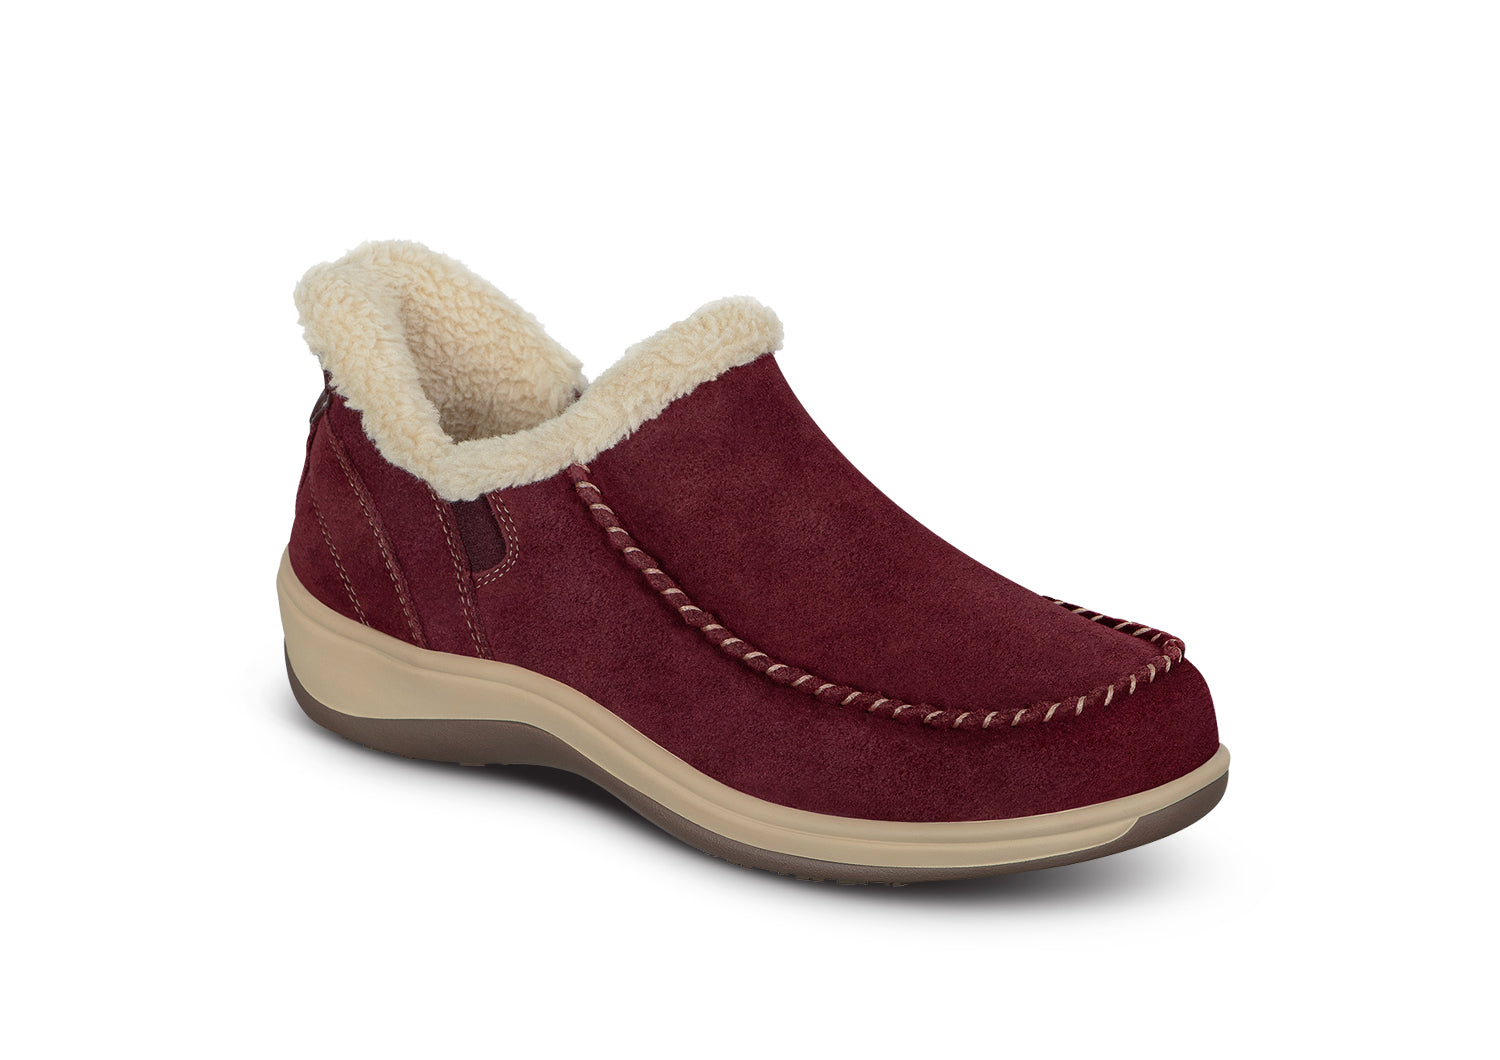 Clogs for Women and Men,Womens Suede Clogs-Mules Womens/Mens House Slipers  with Arch Support